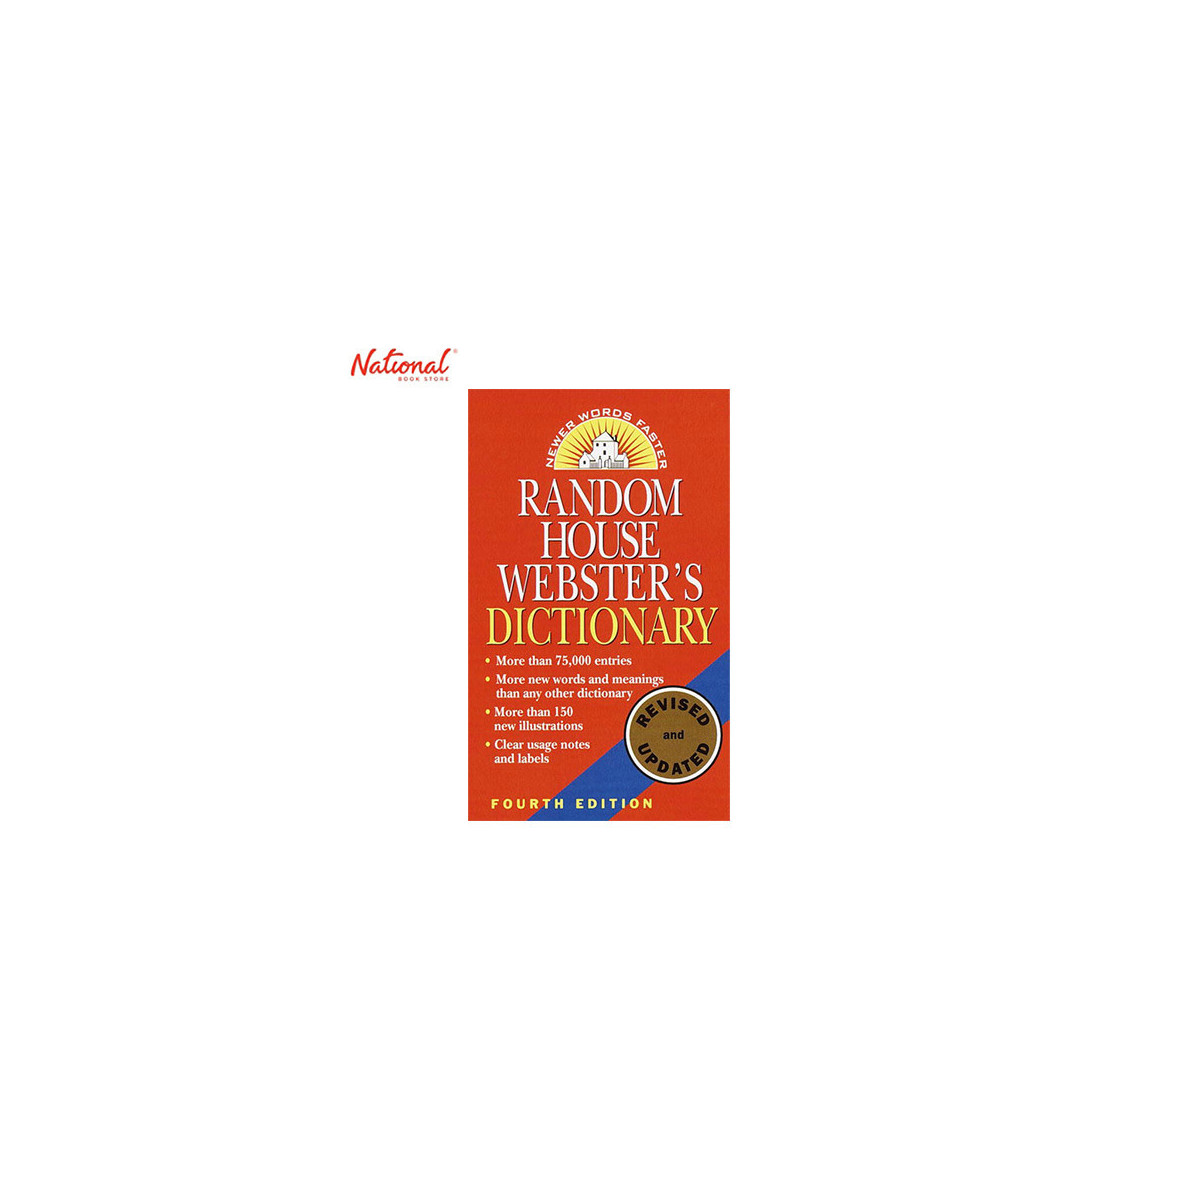 RANDOM HOUSE WEBSTERS DICTIONARY 4TH EDITION